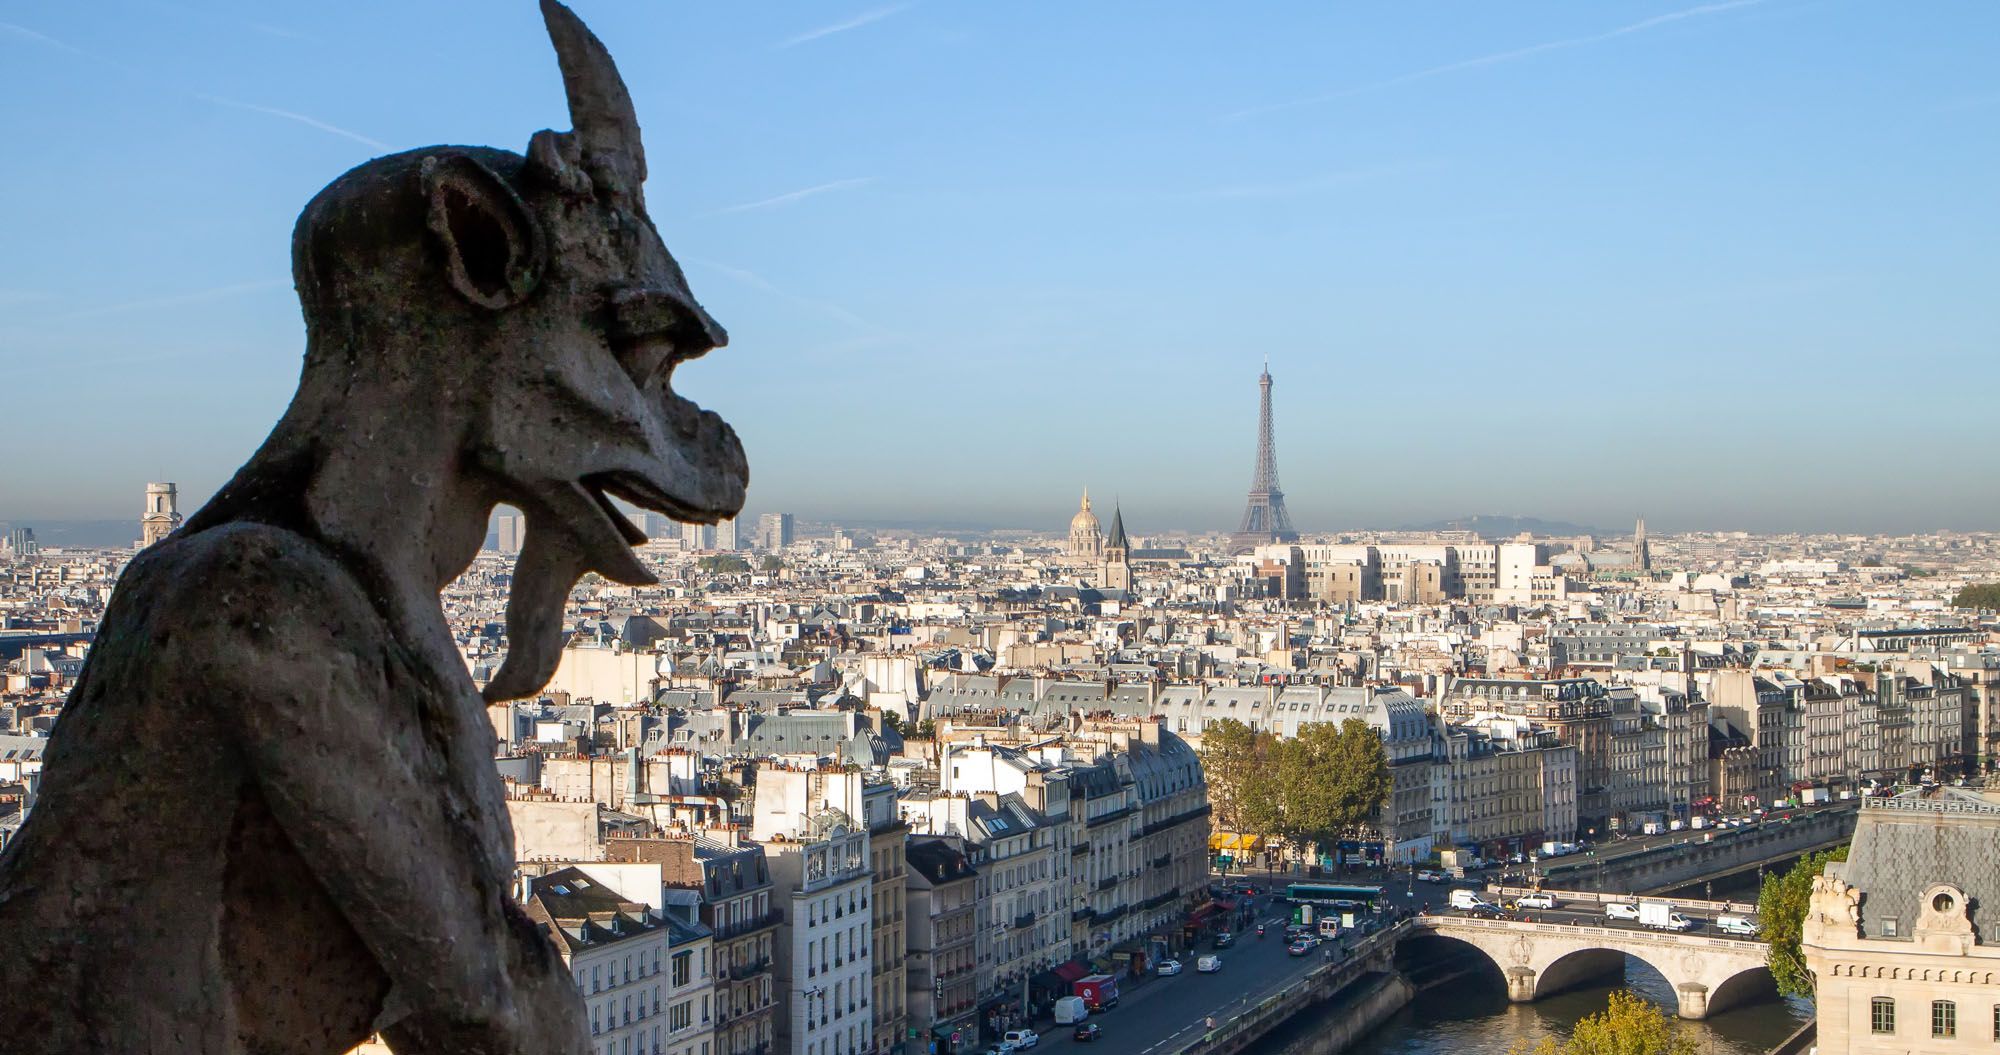 Featured image for “Best Views of Paris: 17 Iconic Views & Photography Locations”